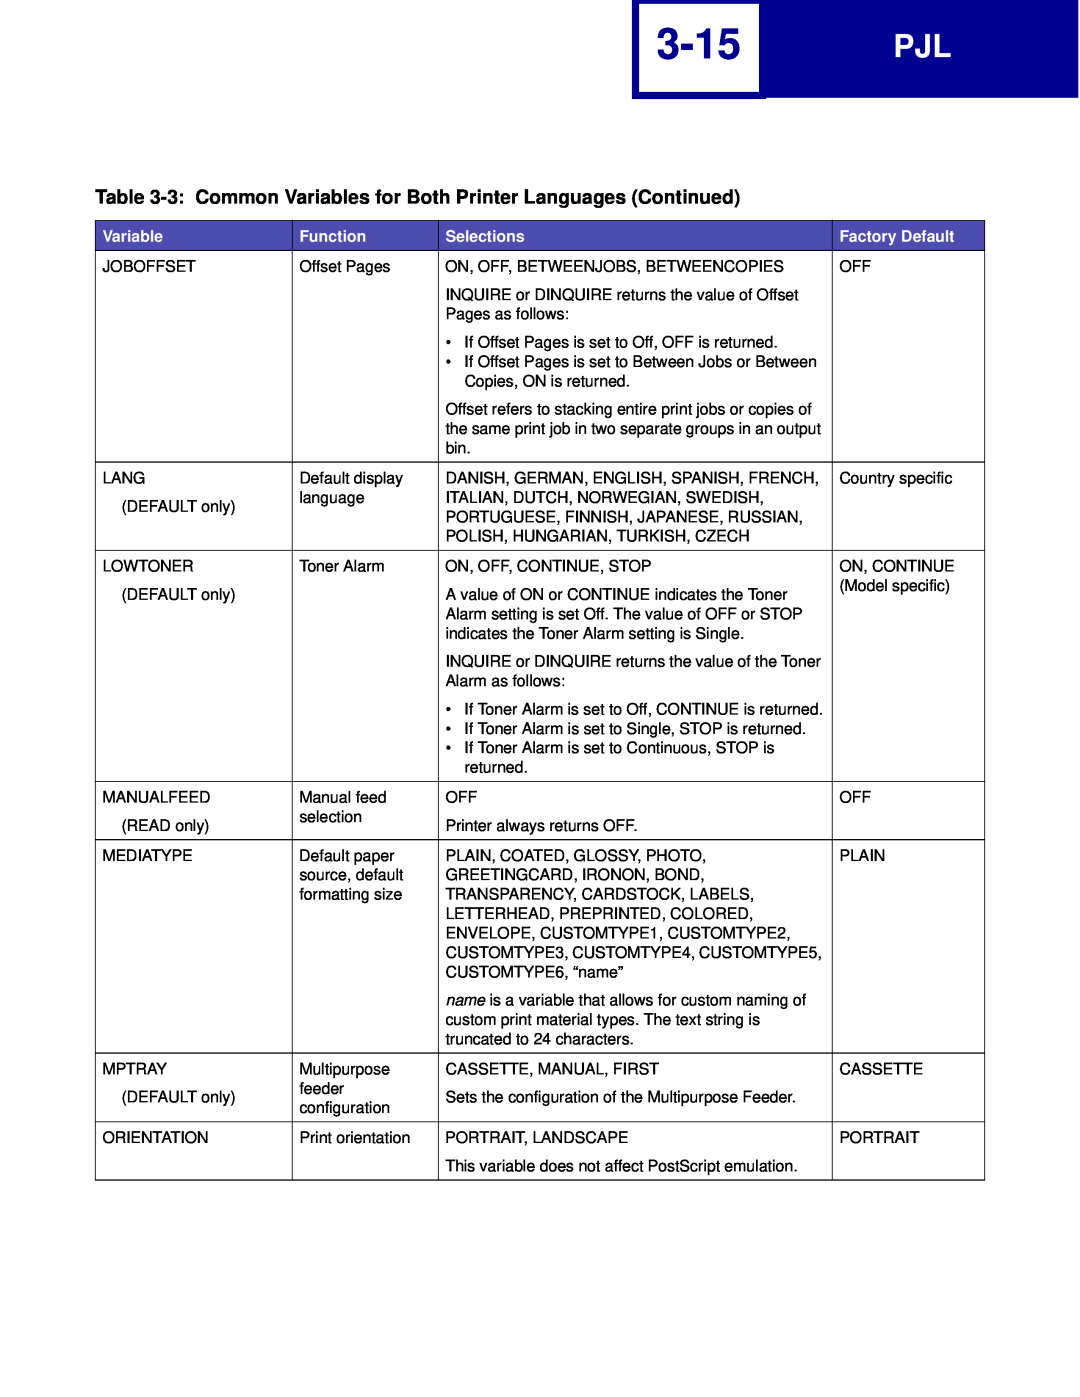 Lexmark C760, C762 manual 3-15, 3 Common Variables for Both Printer Languages Continued 